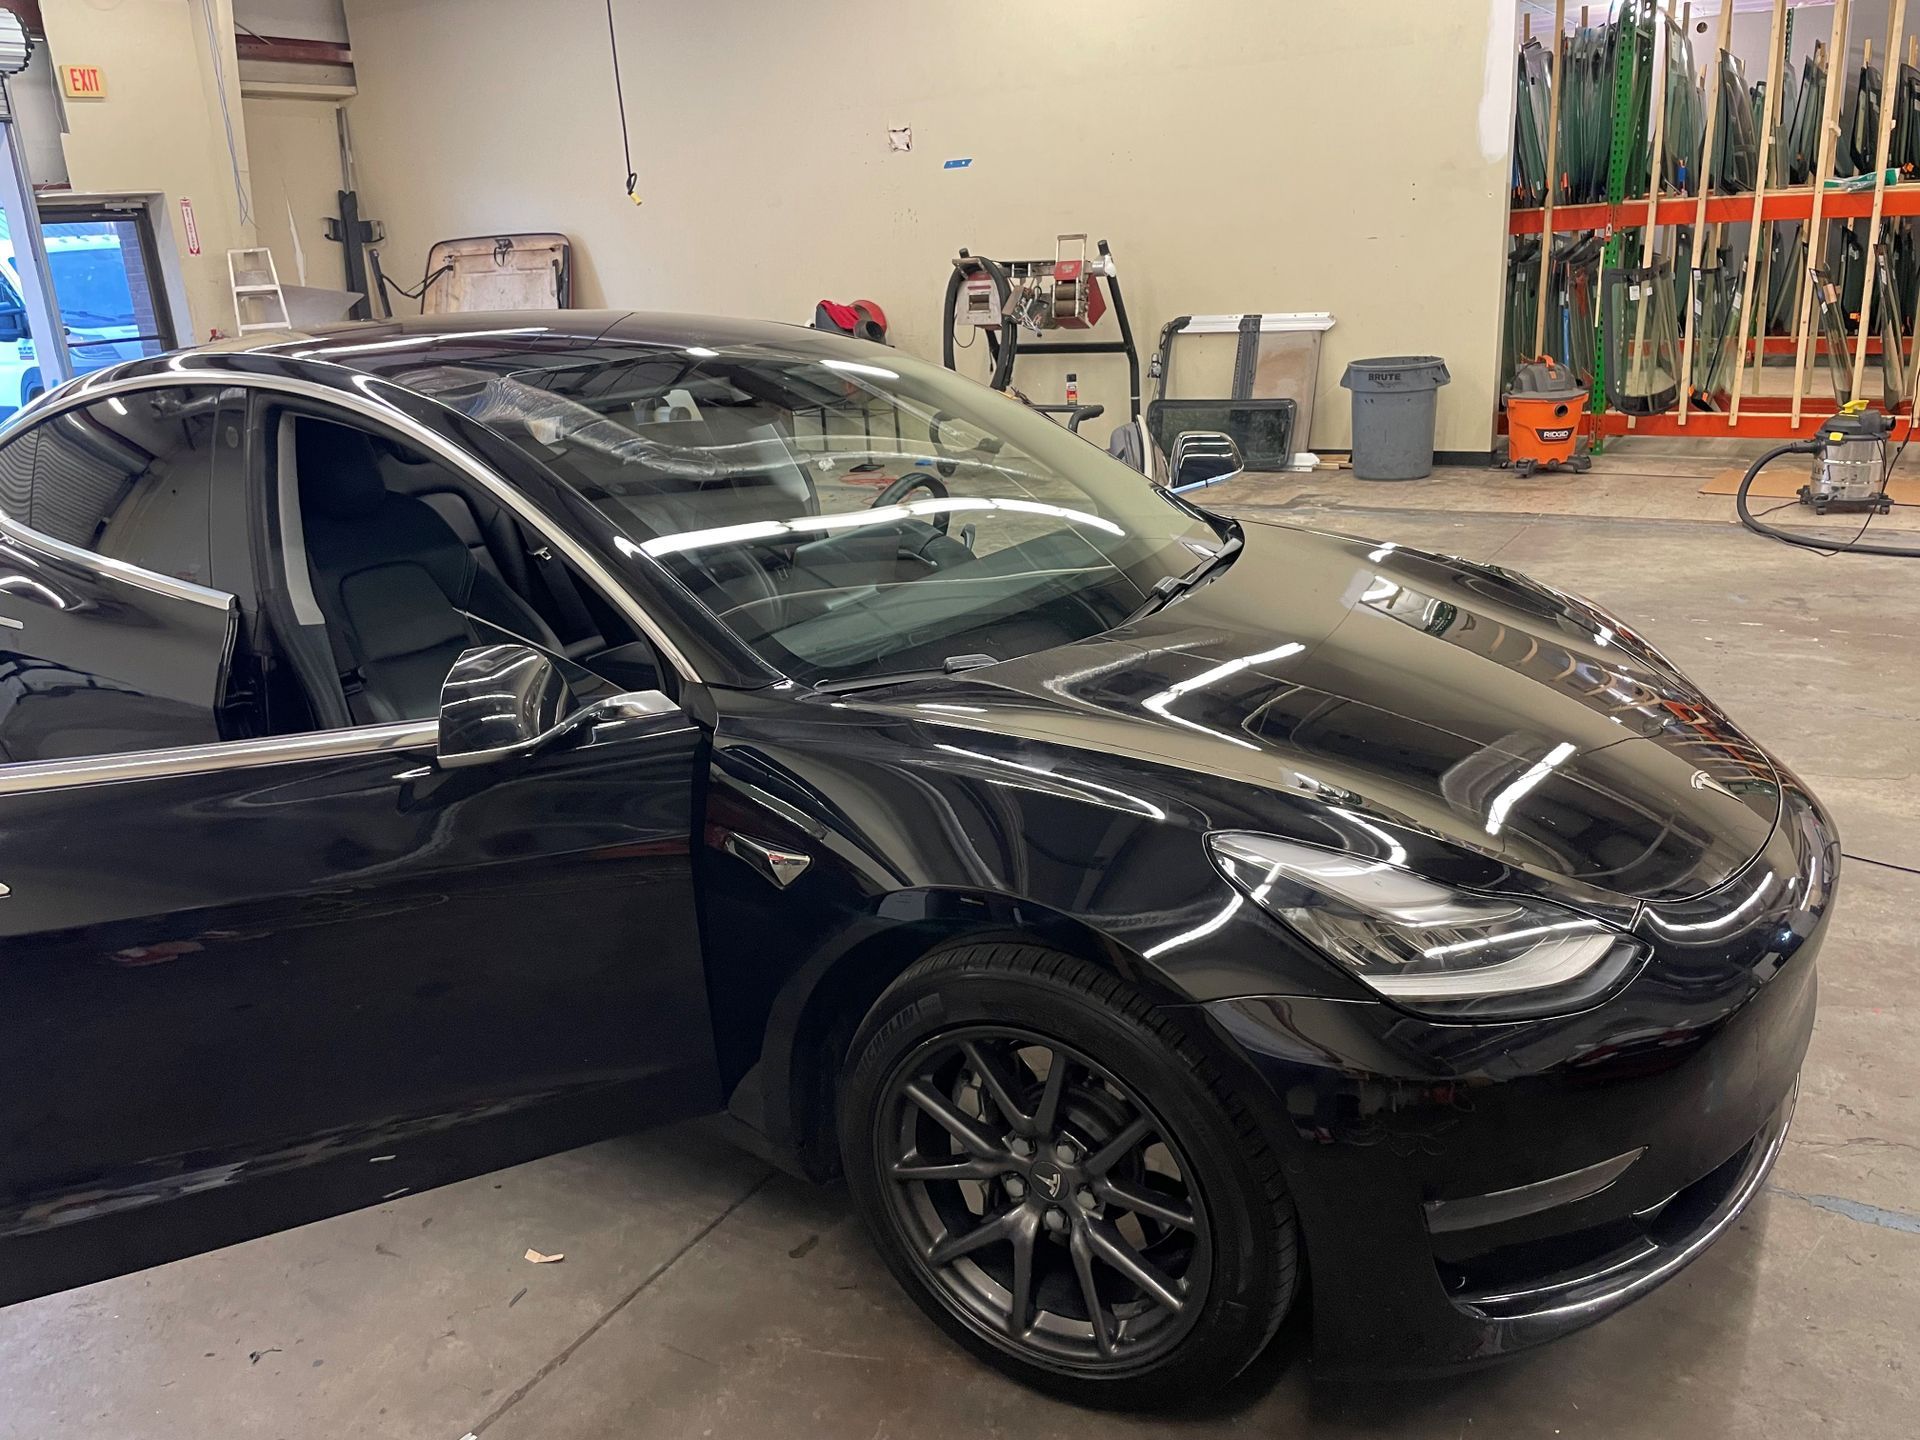 Replacement Windshield For a Tesla in Snellville, GA